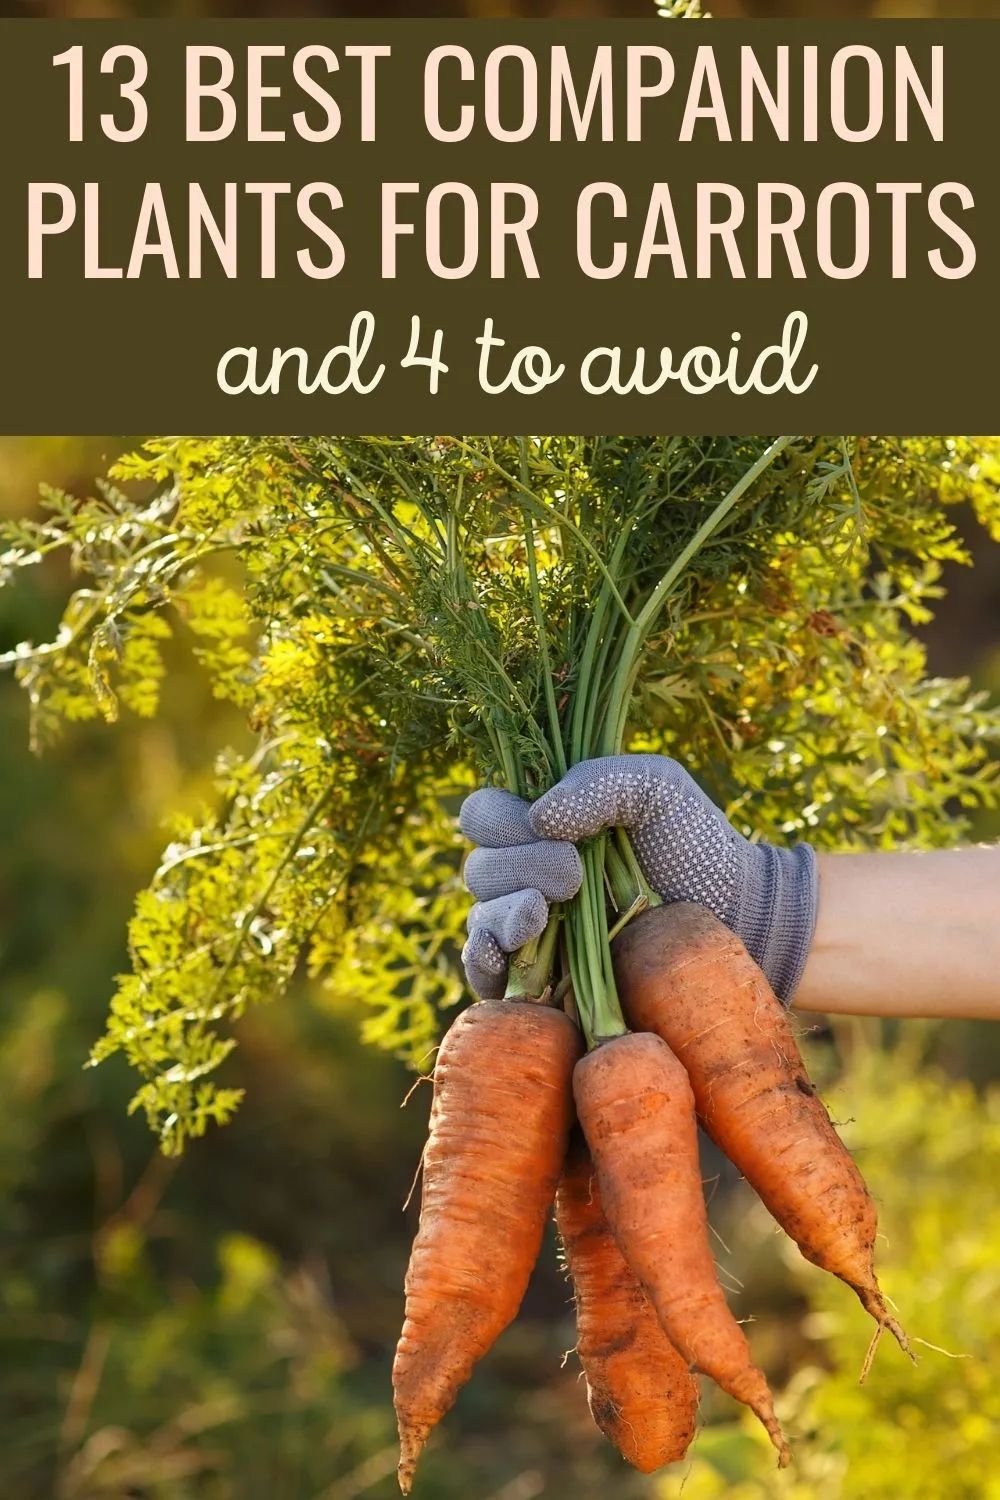 13 best companion plants for carrots and 4 to avoid